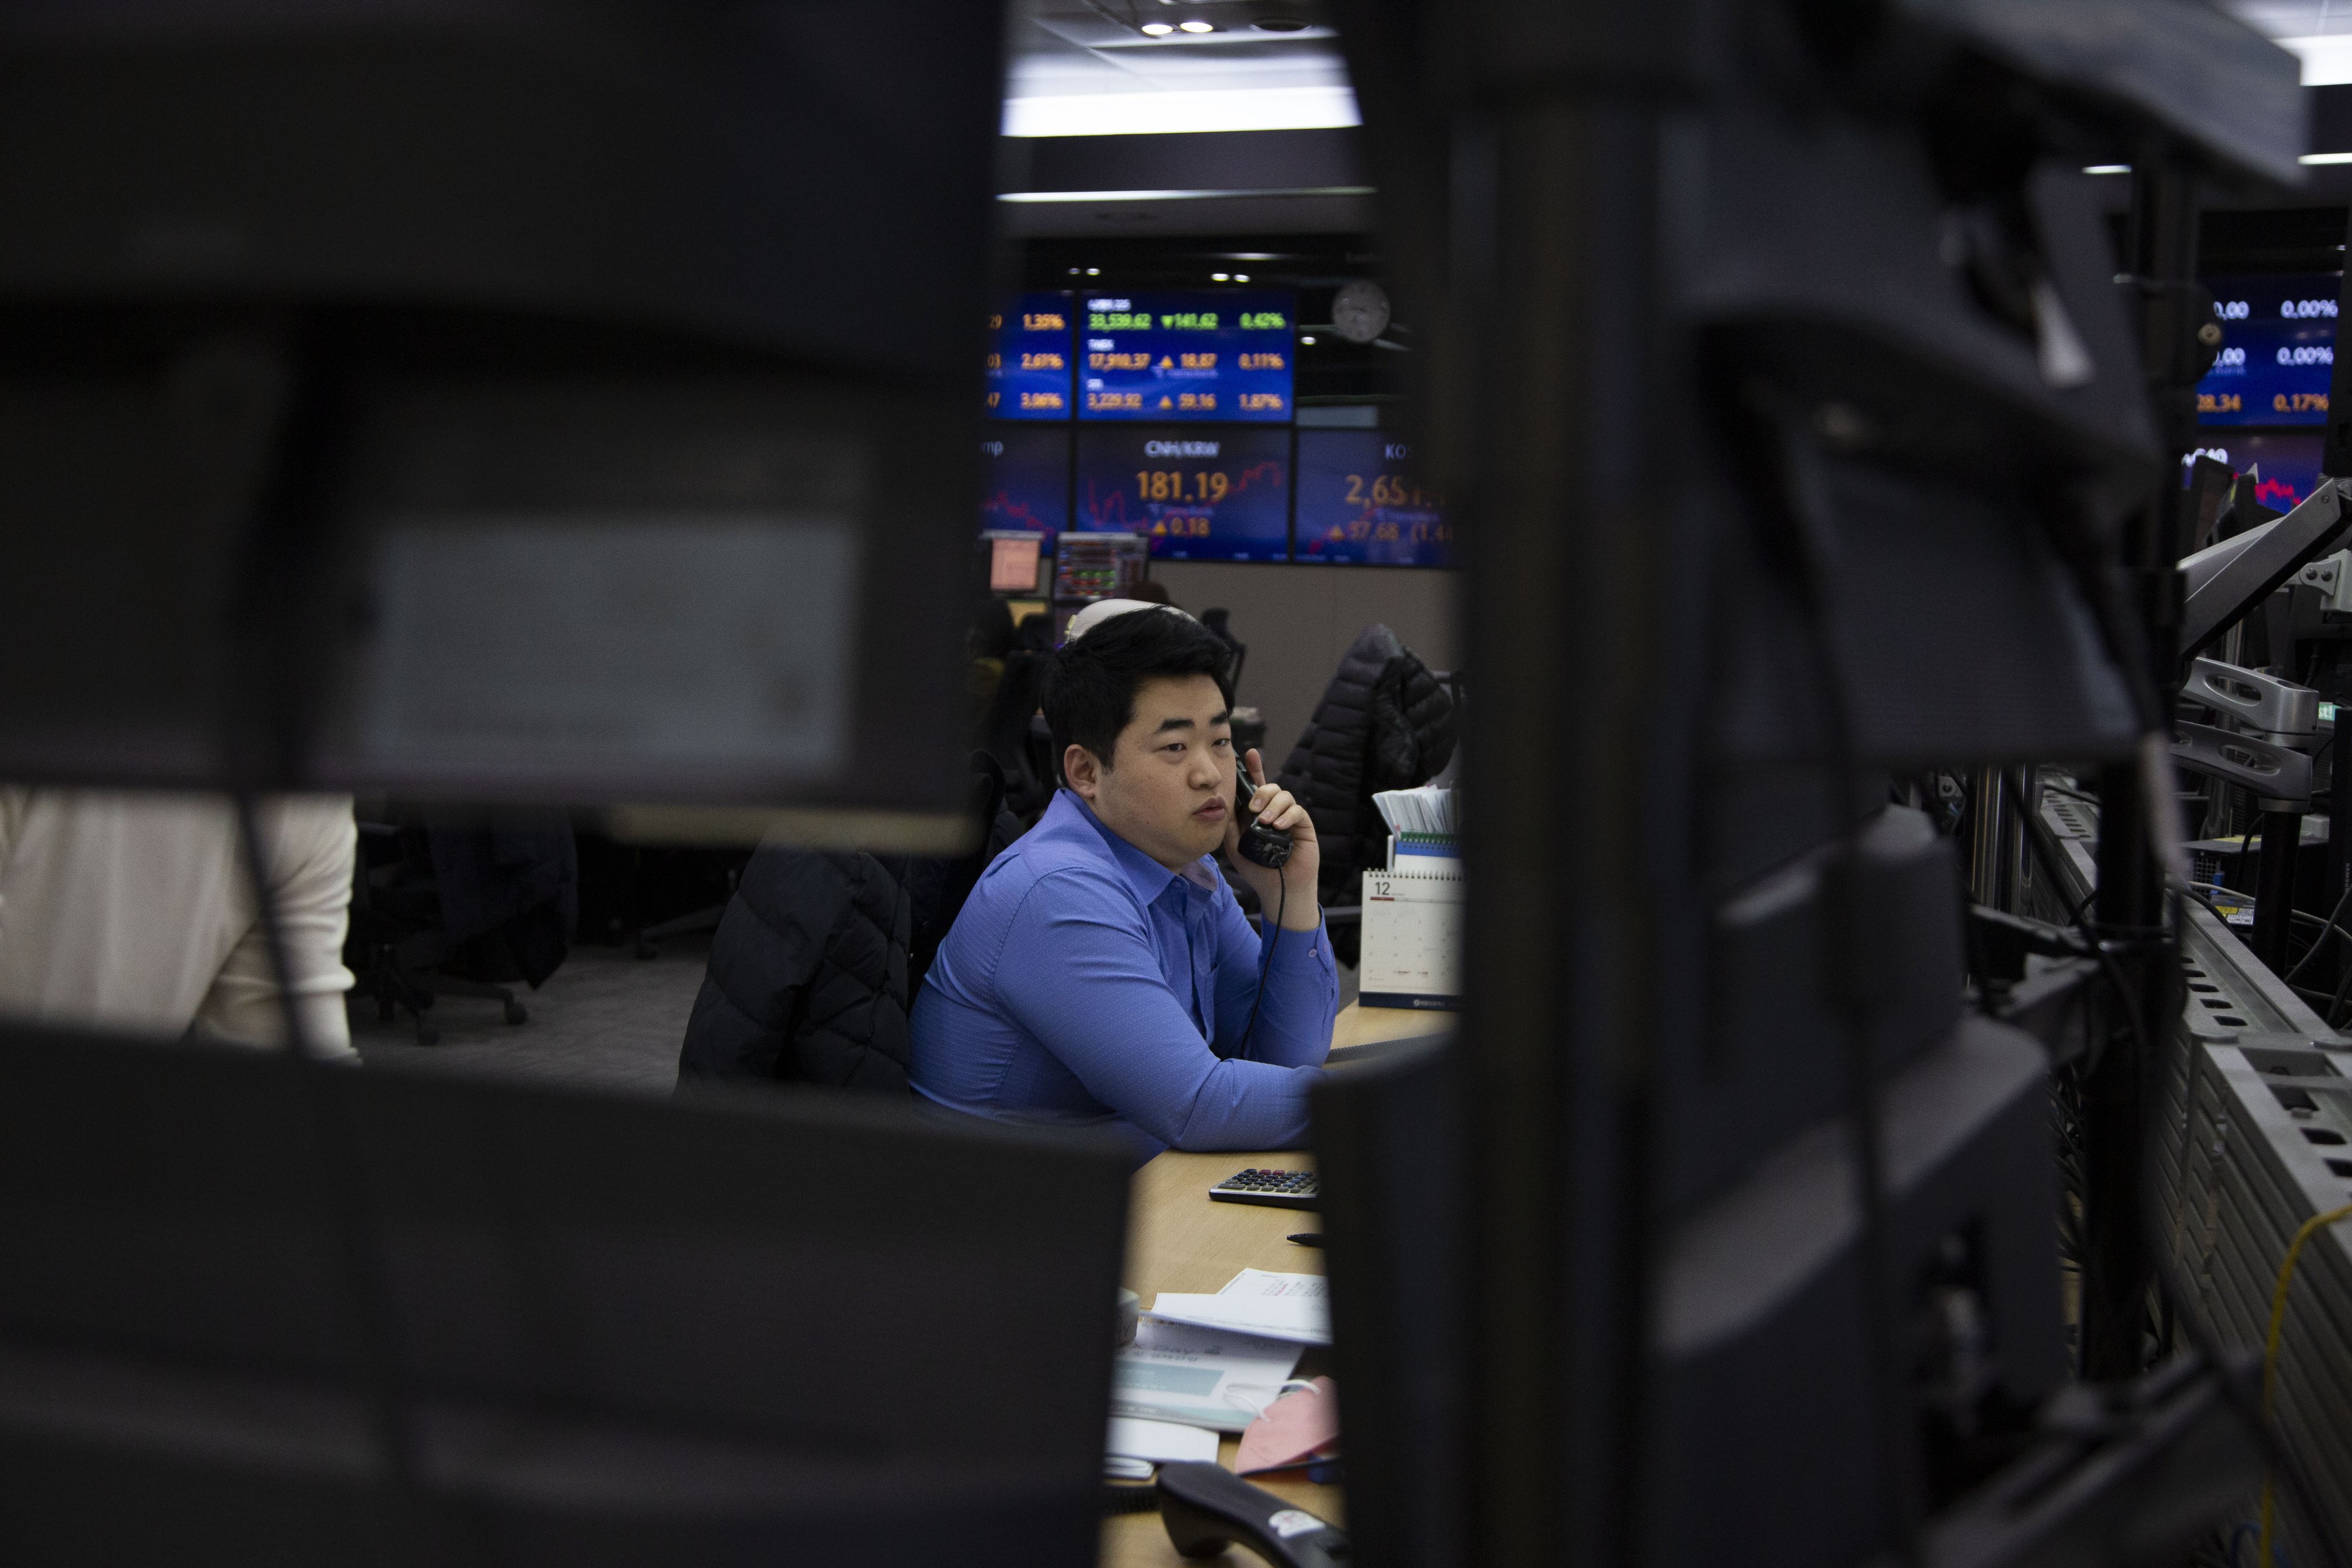 A trader works in front of a bank of monitors at a bank in Seoul on December 28. The lengthening of won trading hours is part of South Korea’s bid to improve access and boost the case for recognition as a developed market. Photo: EPA-EFE